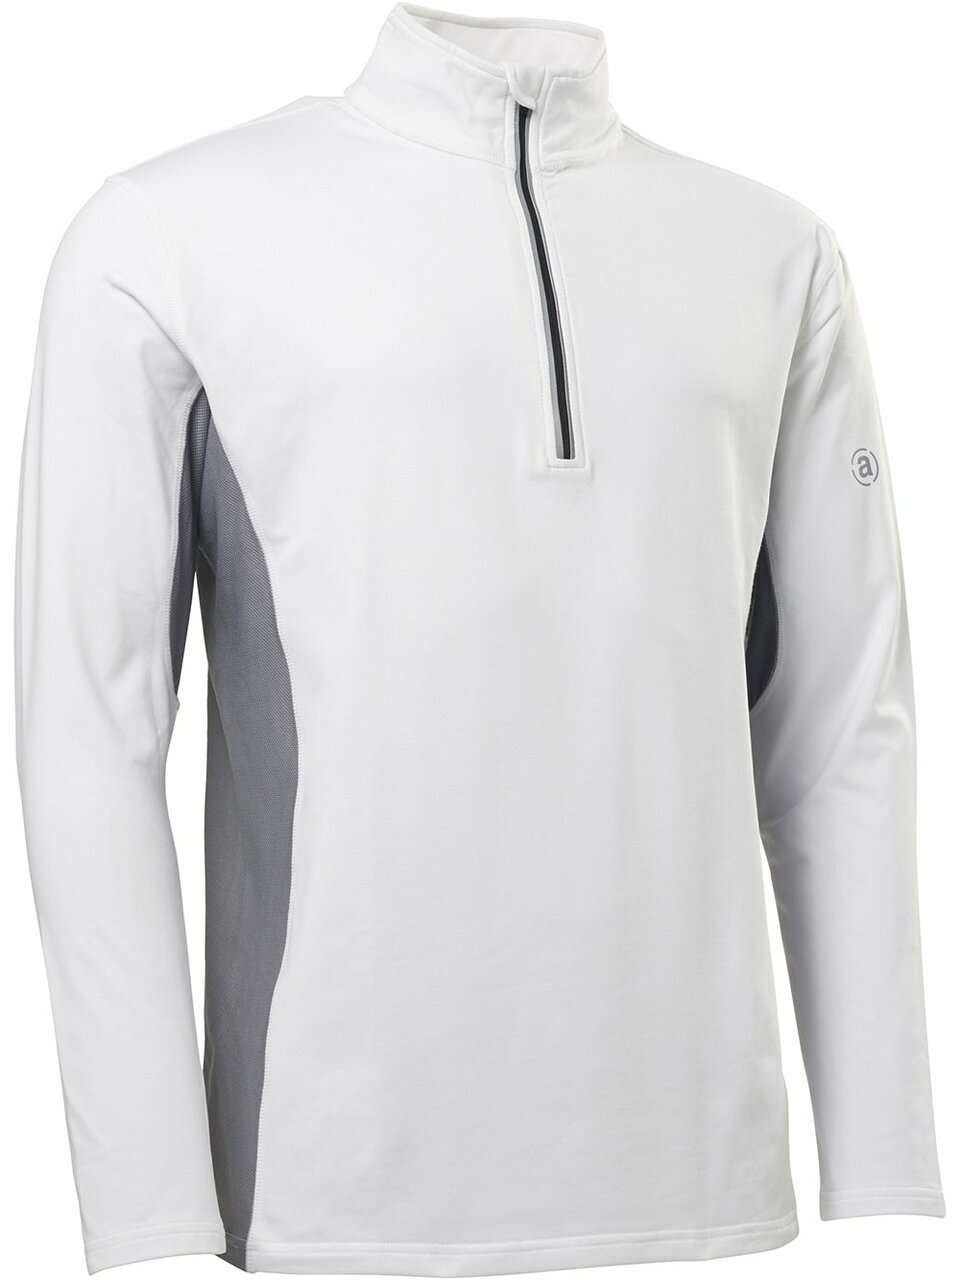 Abacus Sports Wear: Men’s High-Performance 1/2 Zip – Ashby